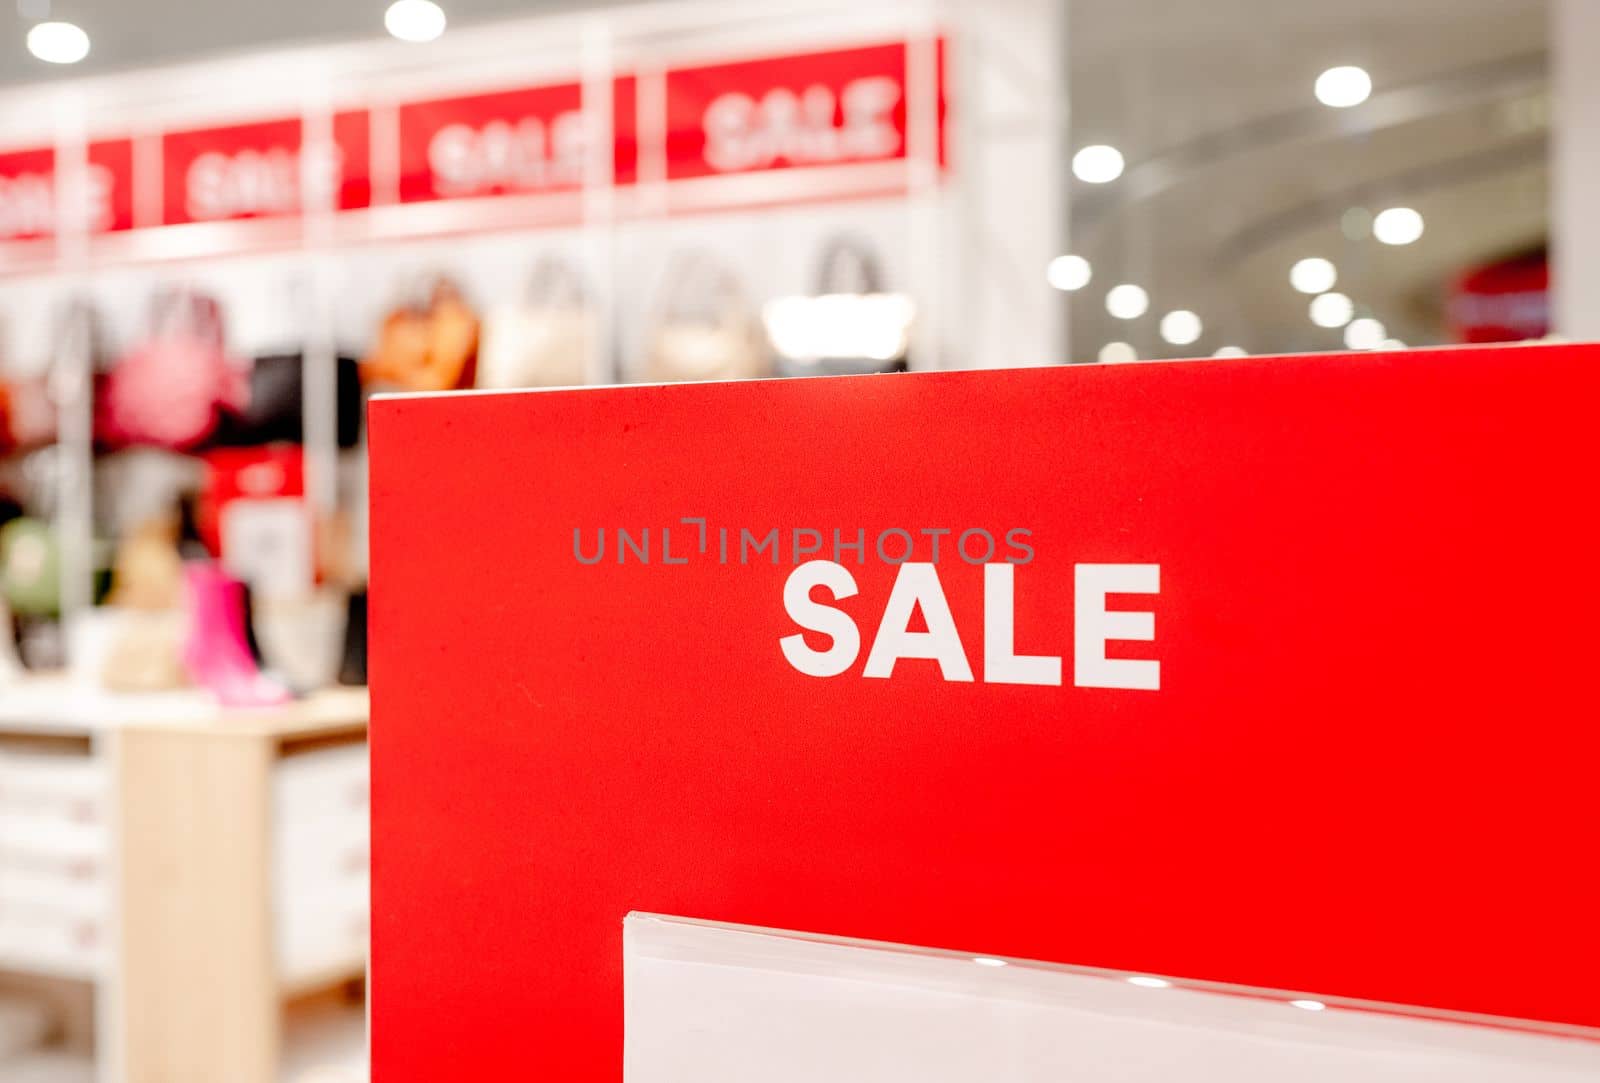 Sale season offers sign in commercial shopping center for better prices and discounts. Business marketing offer and promotions